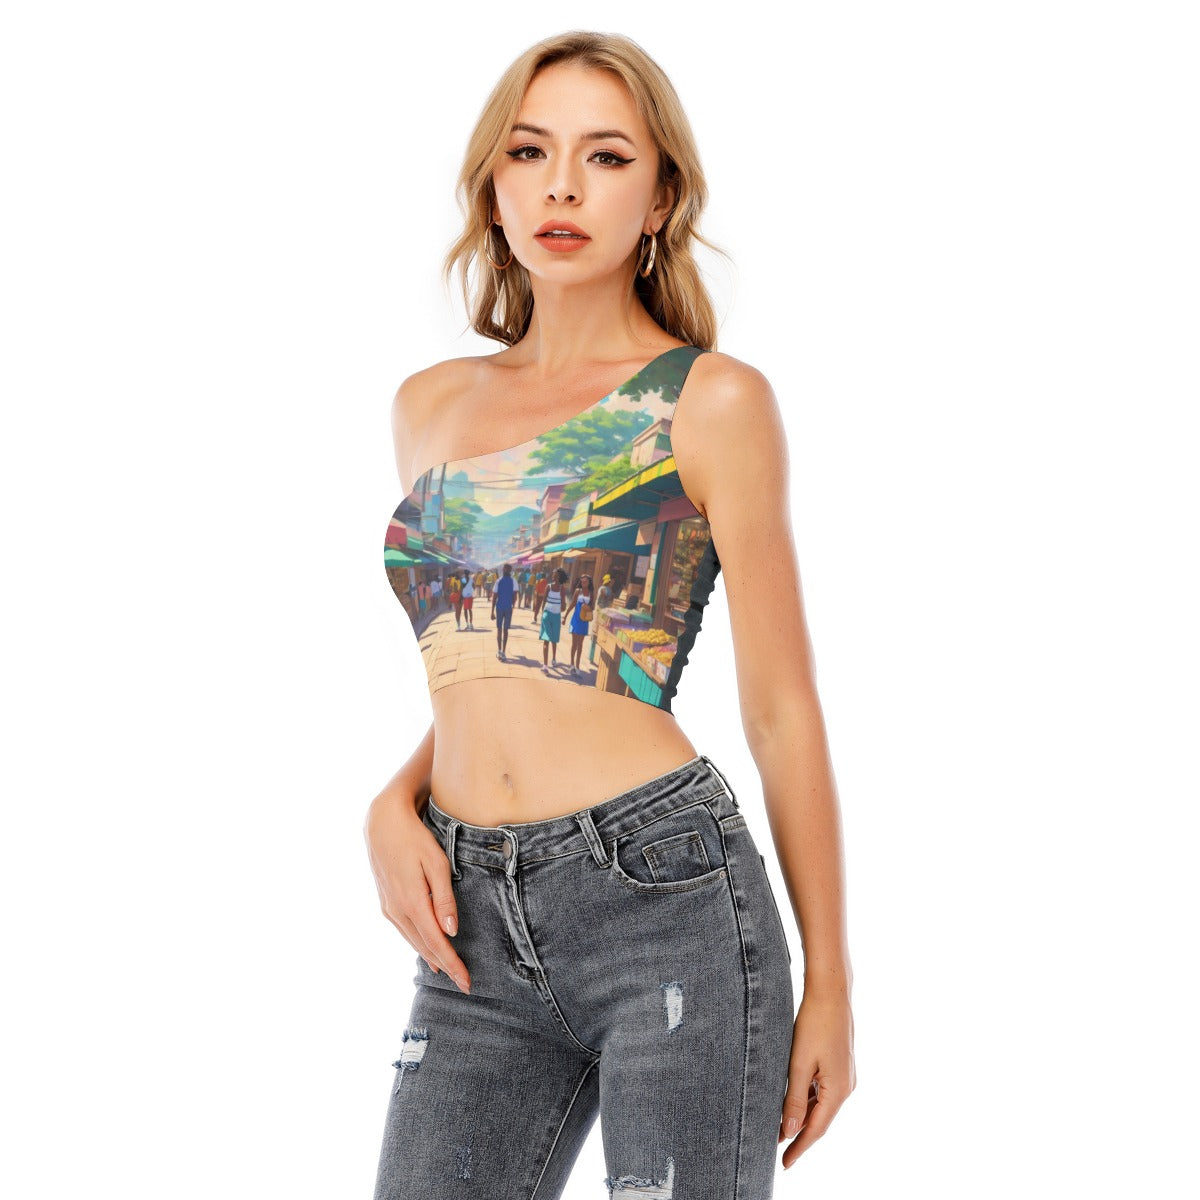 All-Over Print Women's One-Shoulder Cropped Top Yoycol